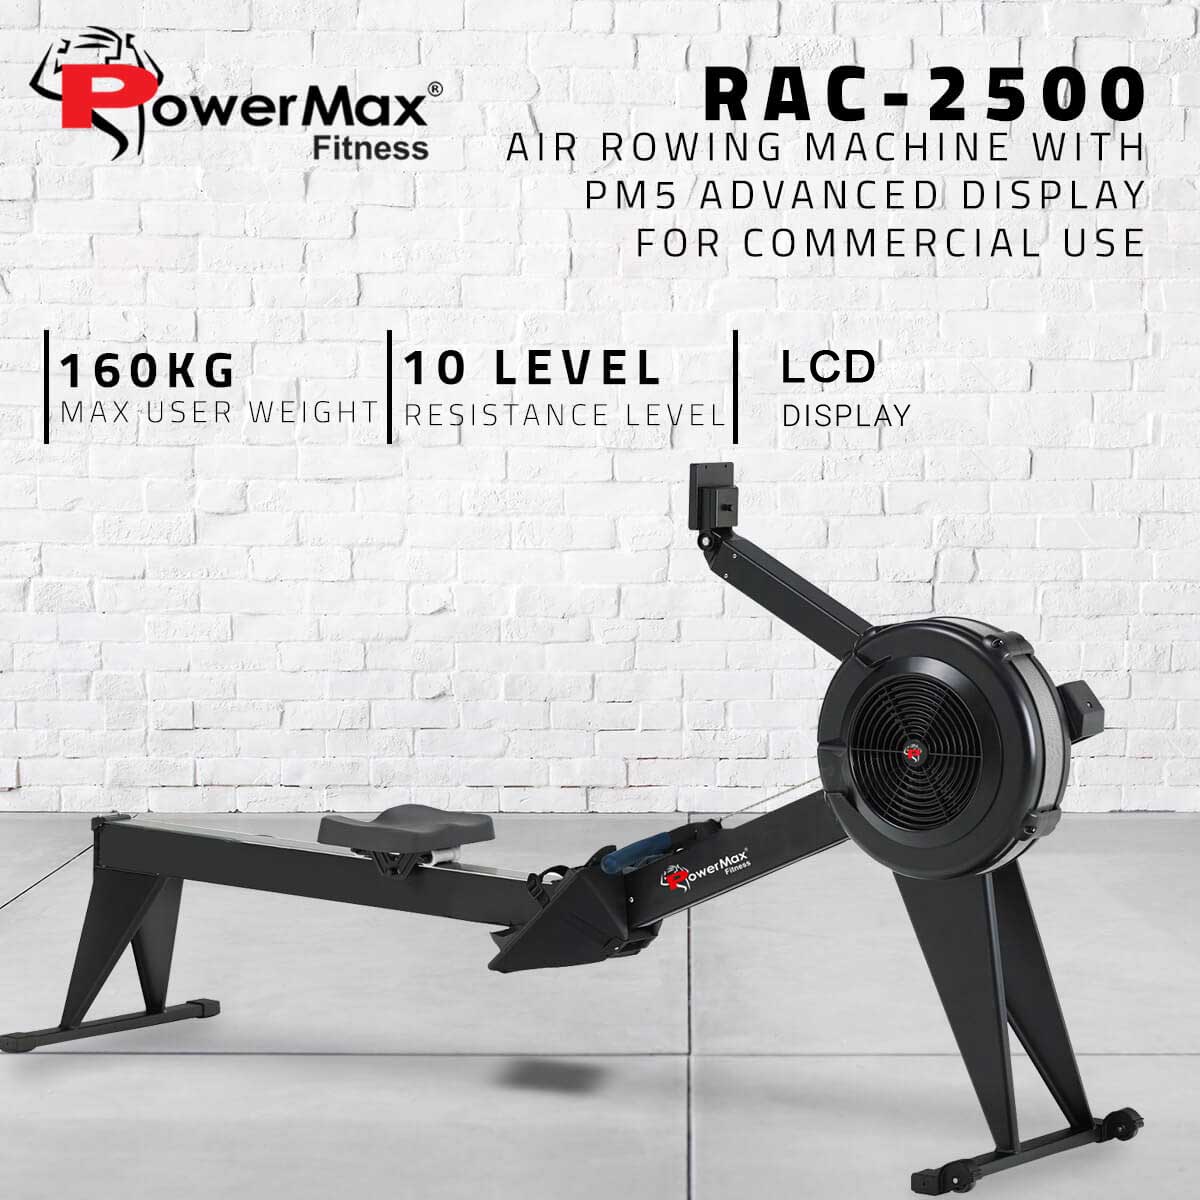 RAC-2500 Air Rowing Machine with LCD Display for Commercial use